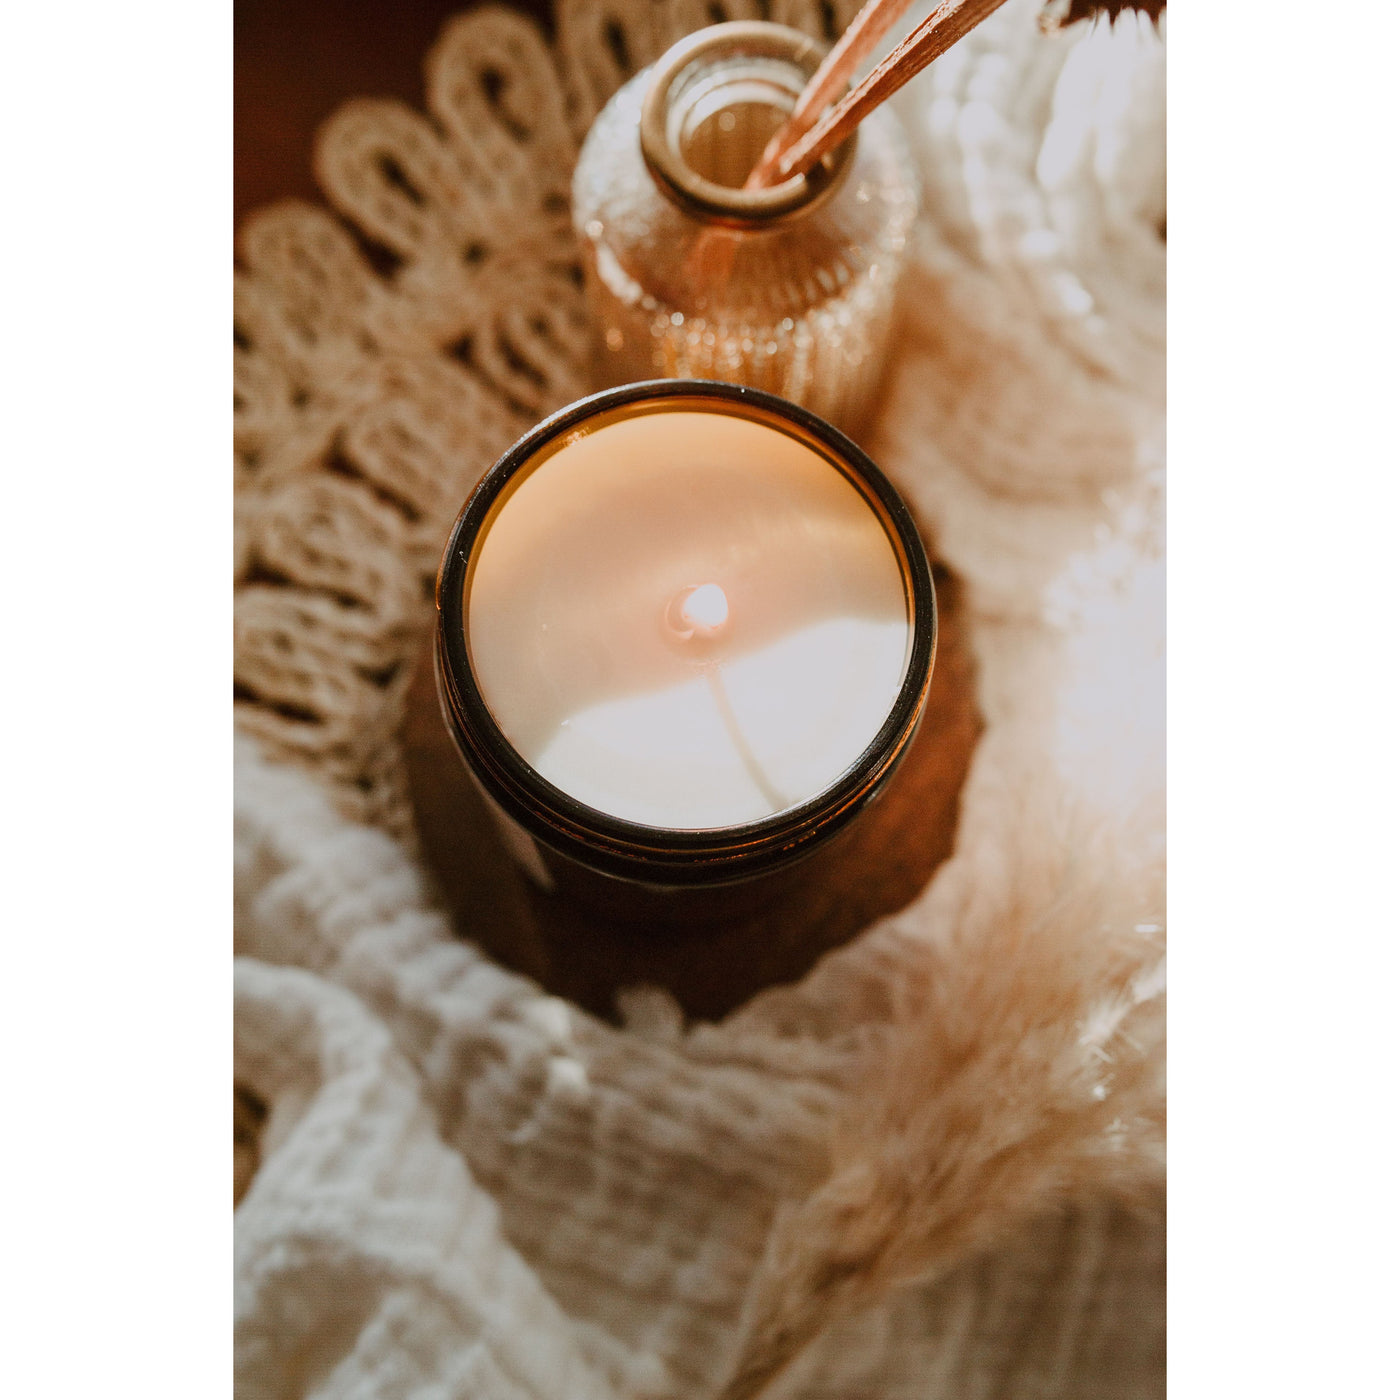 White Sandalwood & Cedar - Scented Soy Candle - Almira Creations